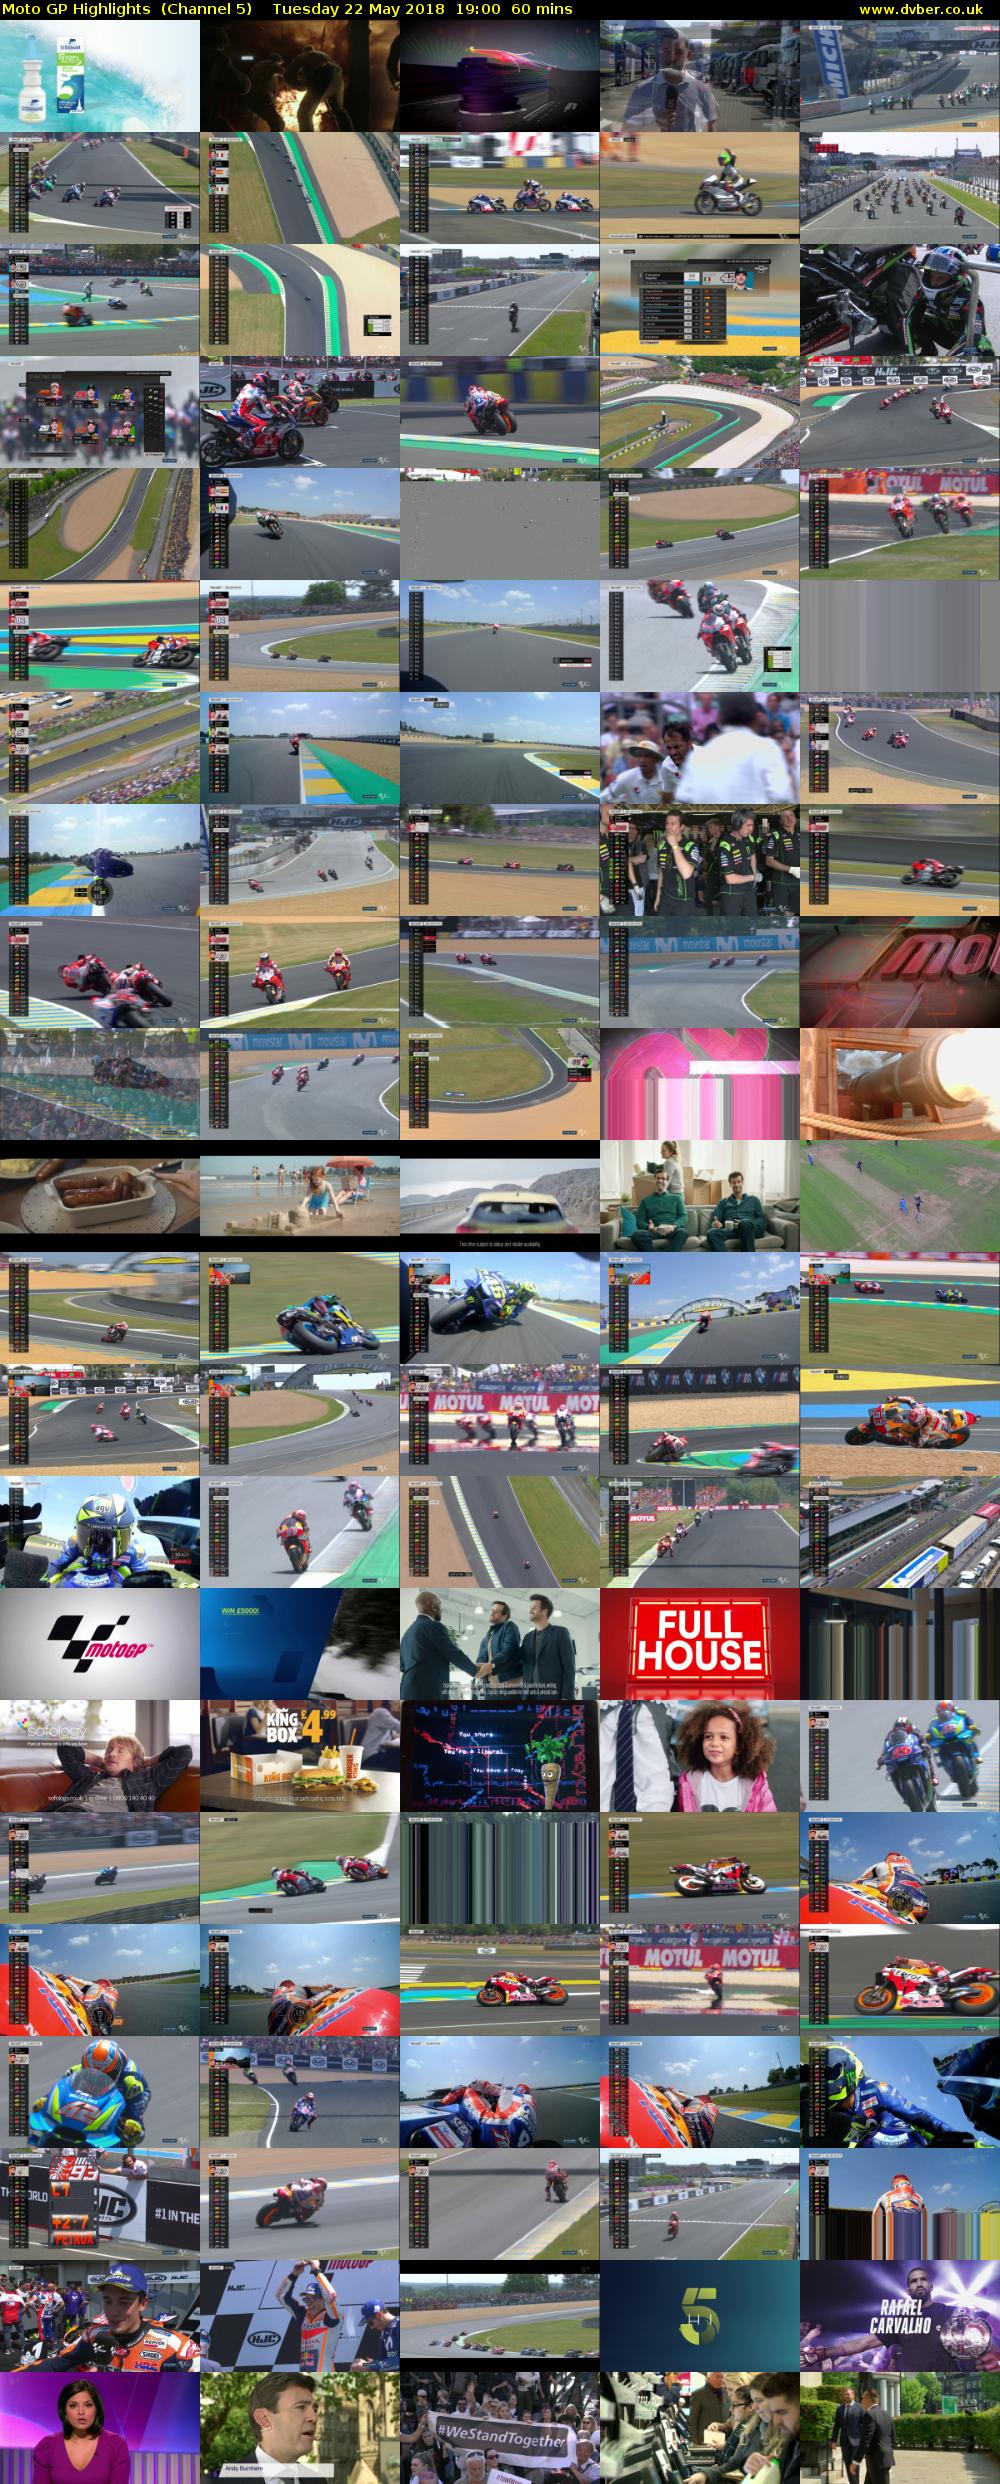 Moto GP Highlights  (Channel 5) Tuesday 22 May 2018 19:00 - 20:00